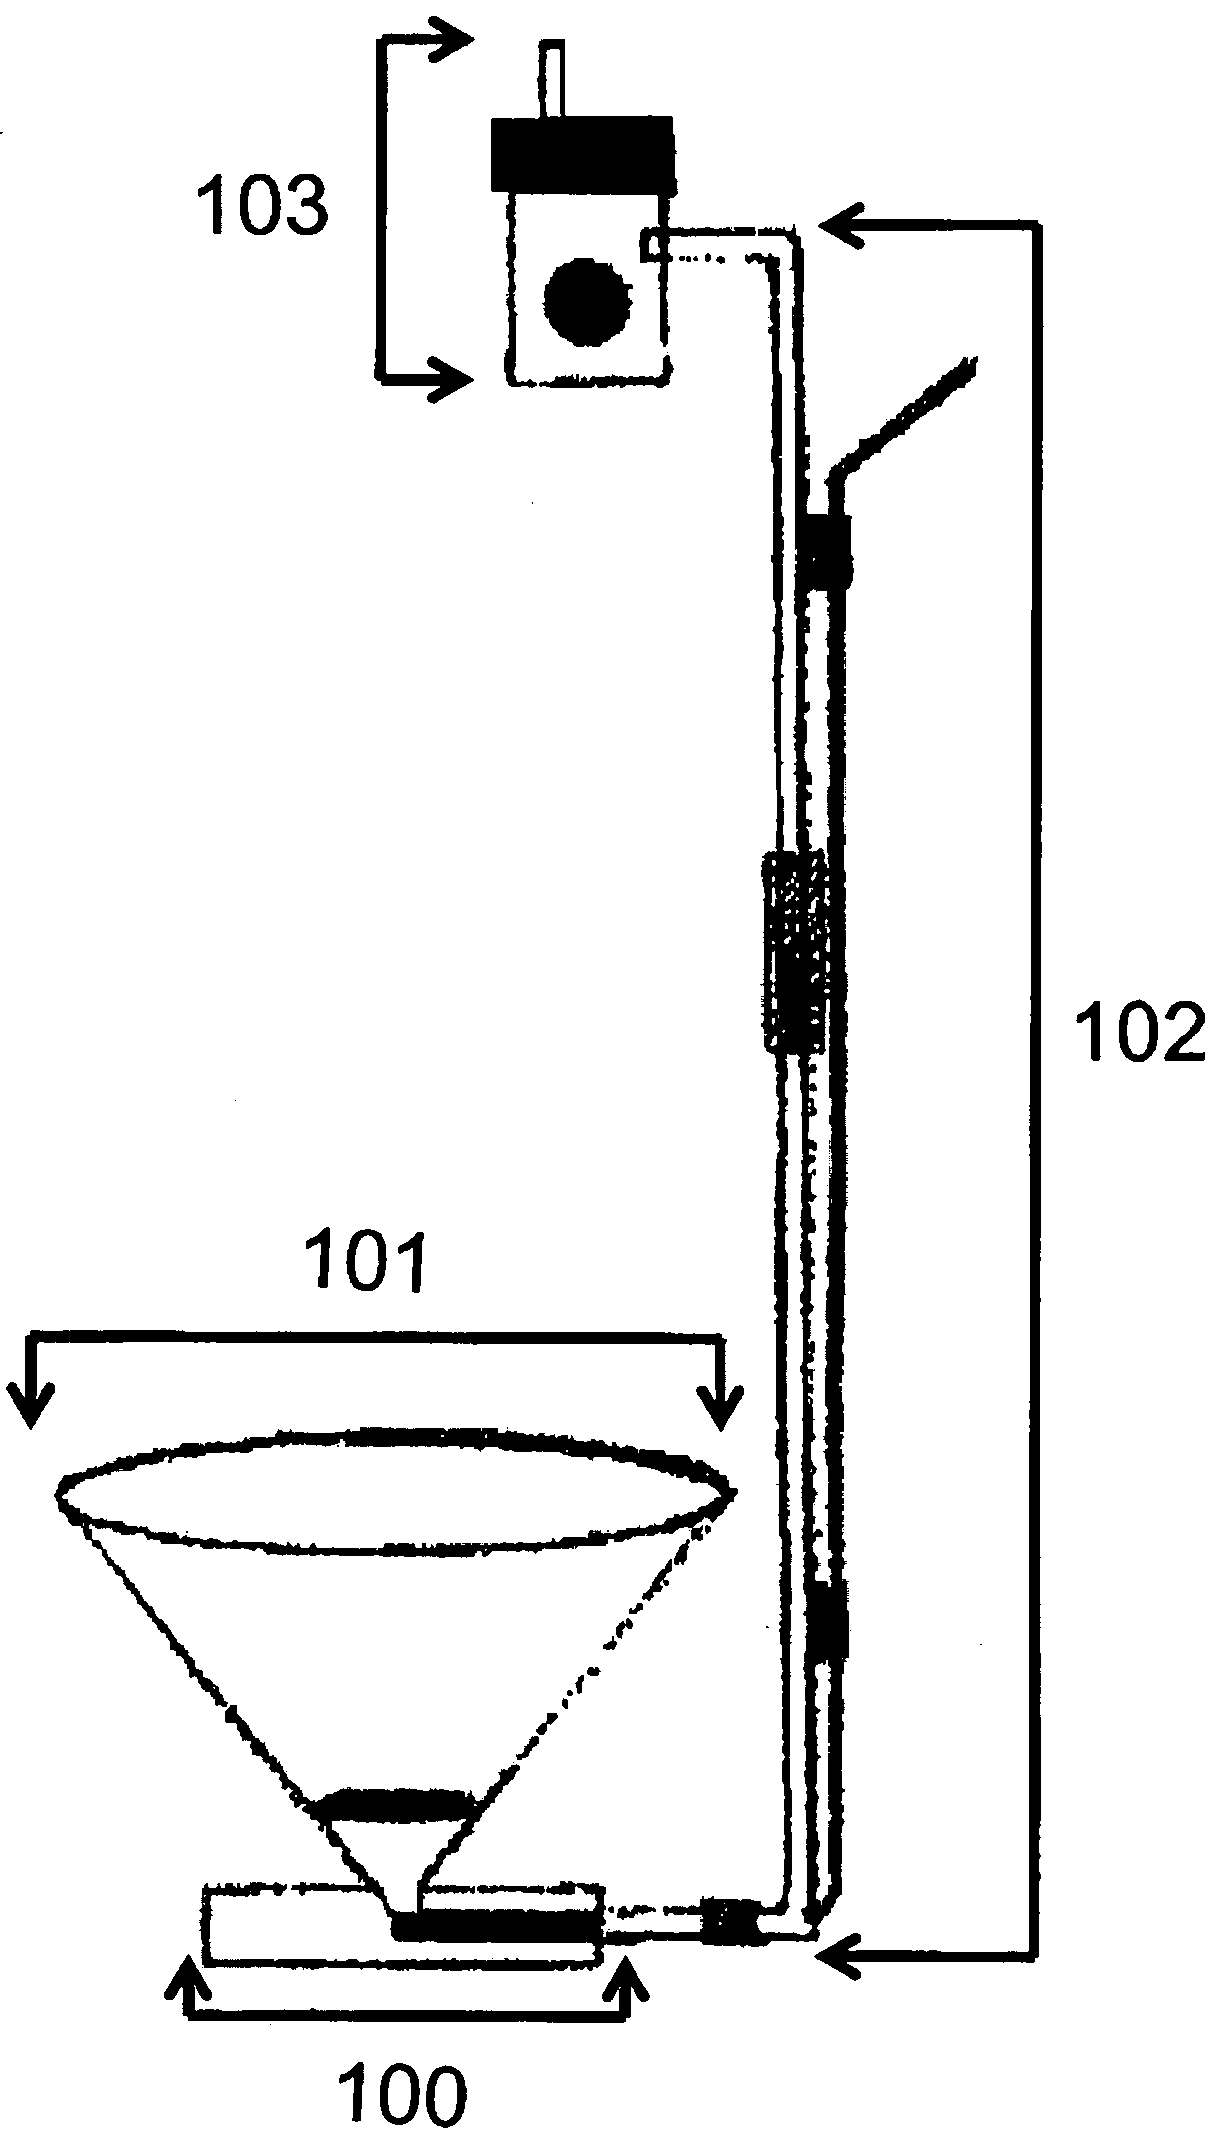 Aquatic animal egg collection apparatus, and method of use